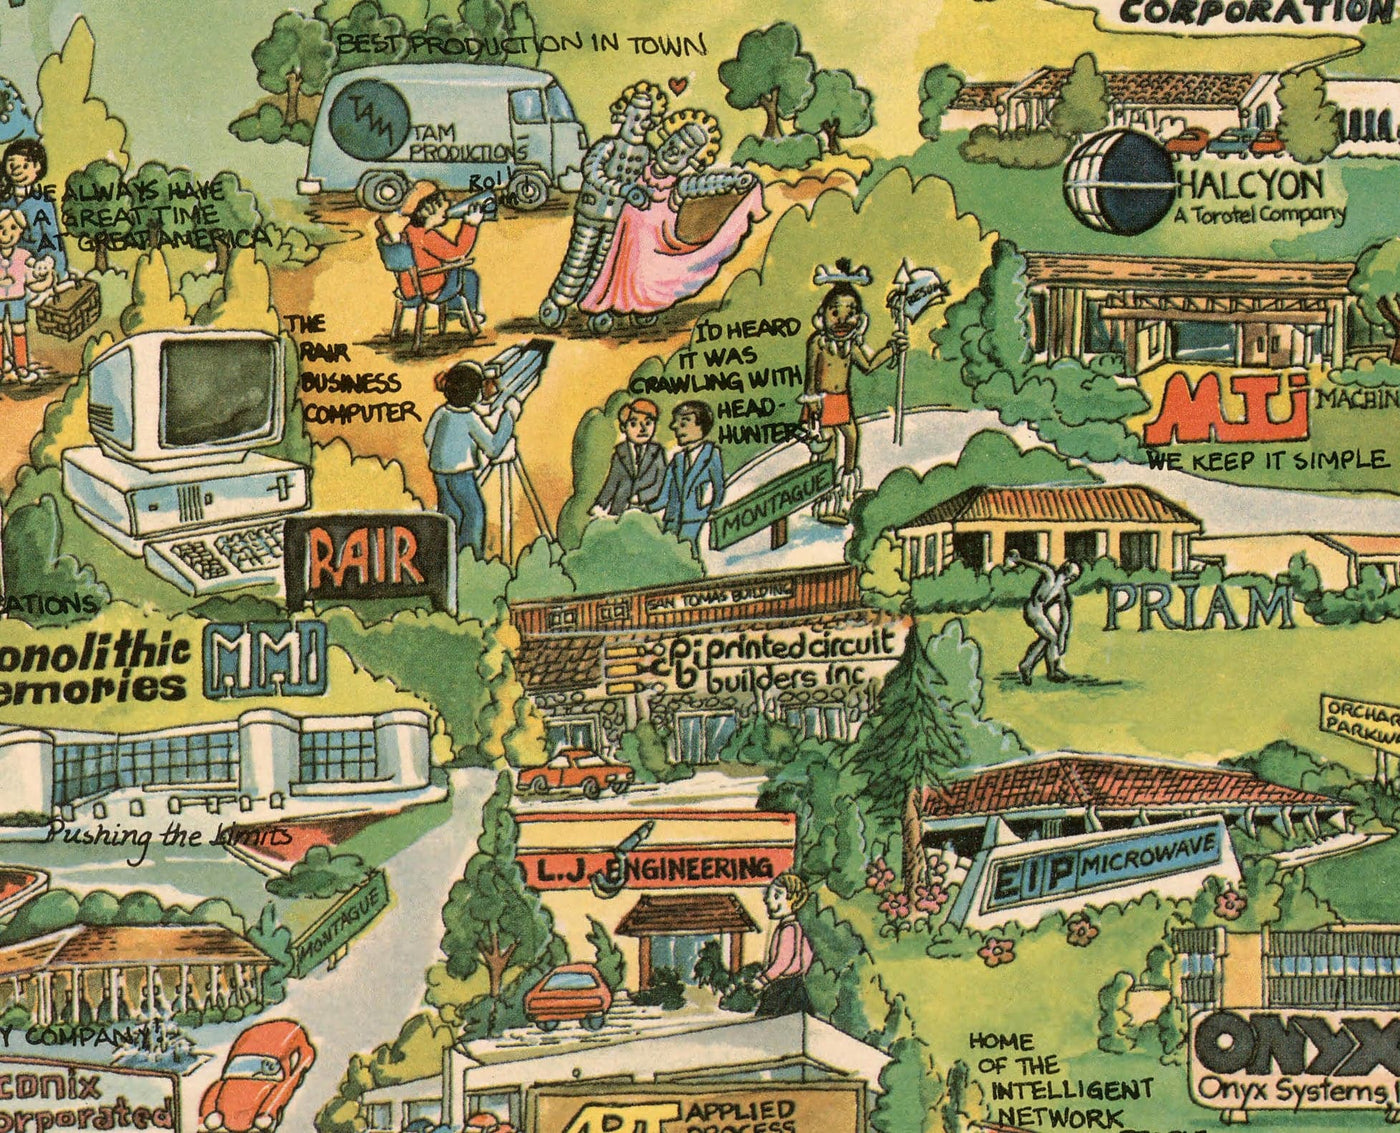 Old Map of Silicon Valley, 1982 - Pictorial Chart of Mountainview, Sunnyvale, Cupertino, San Jose, Fremont